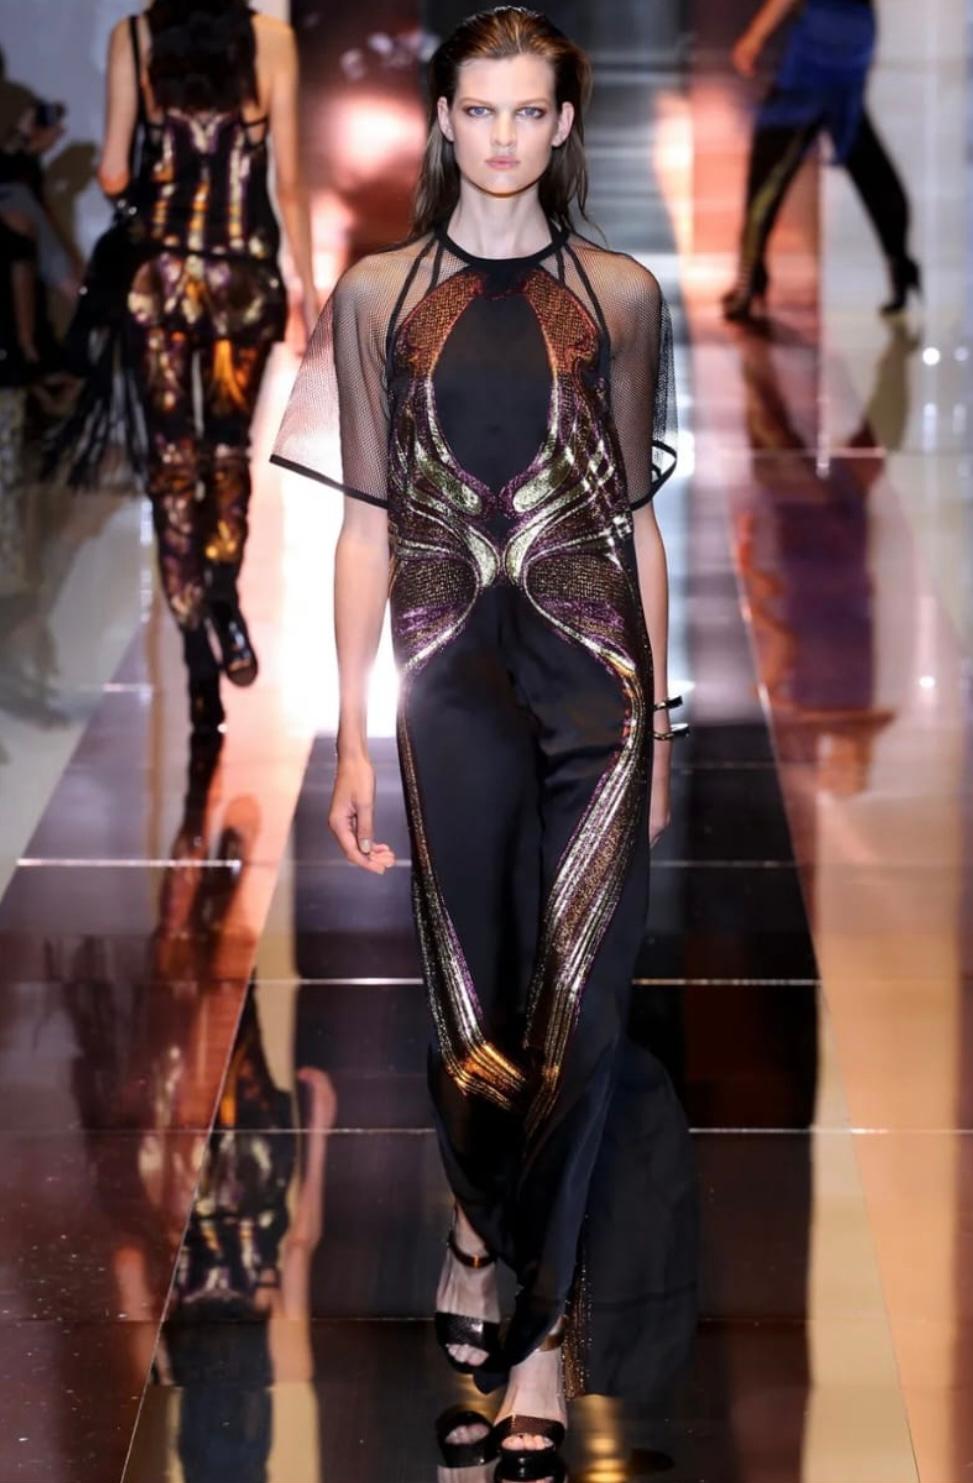 Modeled by Bette Franke in the look 33 of the Spring-Summer 2014 Gucci runway show (see pictures 2, 3 & 4), this maxi dress strikes a balance of being dressed up and feeling comfortable and relaxed at the same time. Made in Italy from refined black